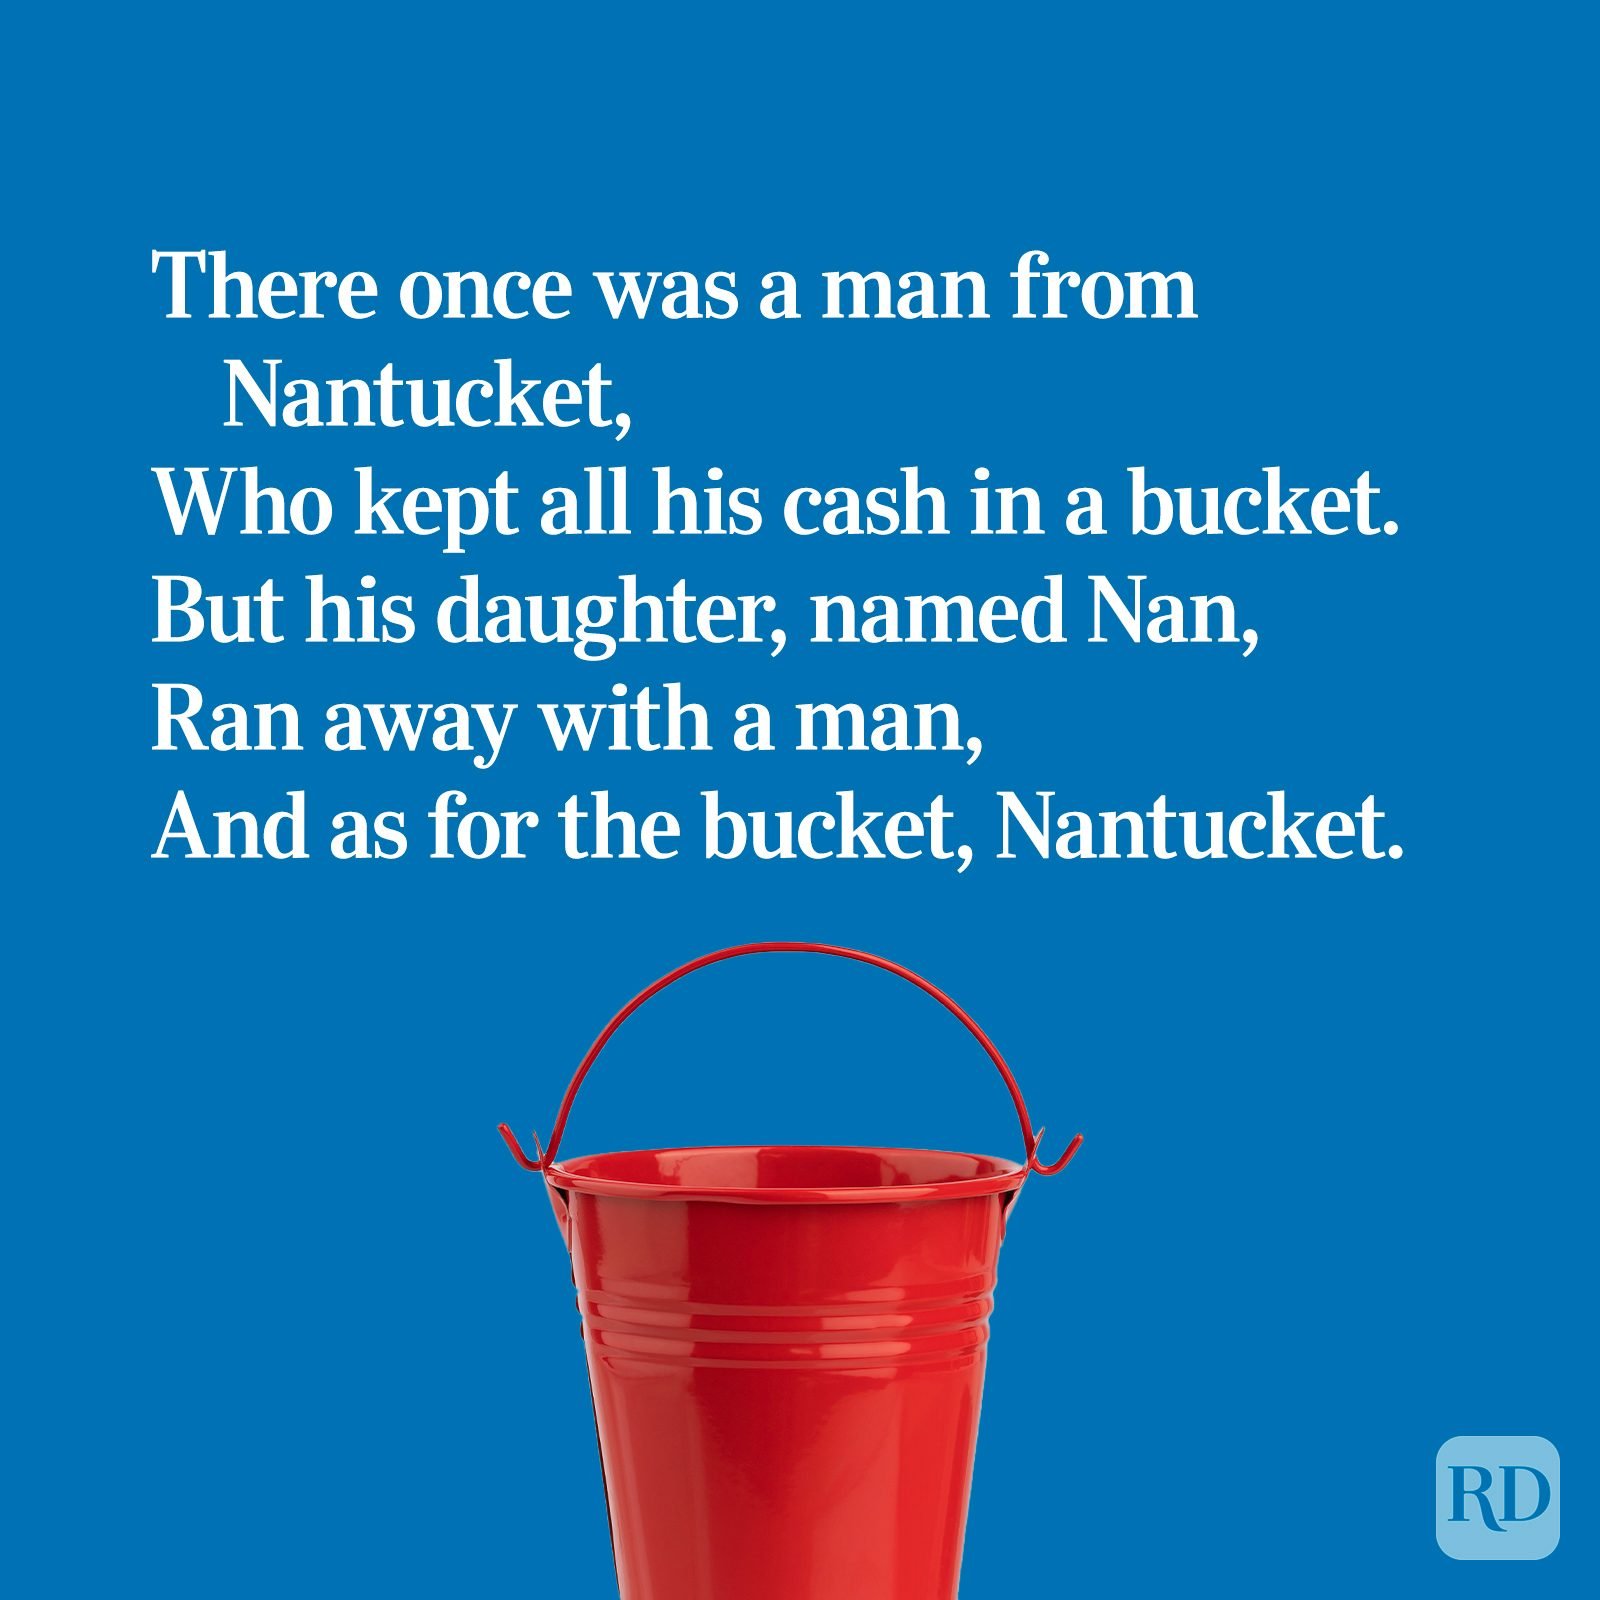 7 Famous Limerick Examples | Common Limerick Formats, Funny Rhymes